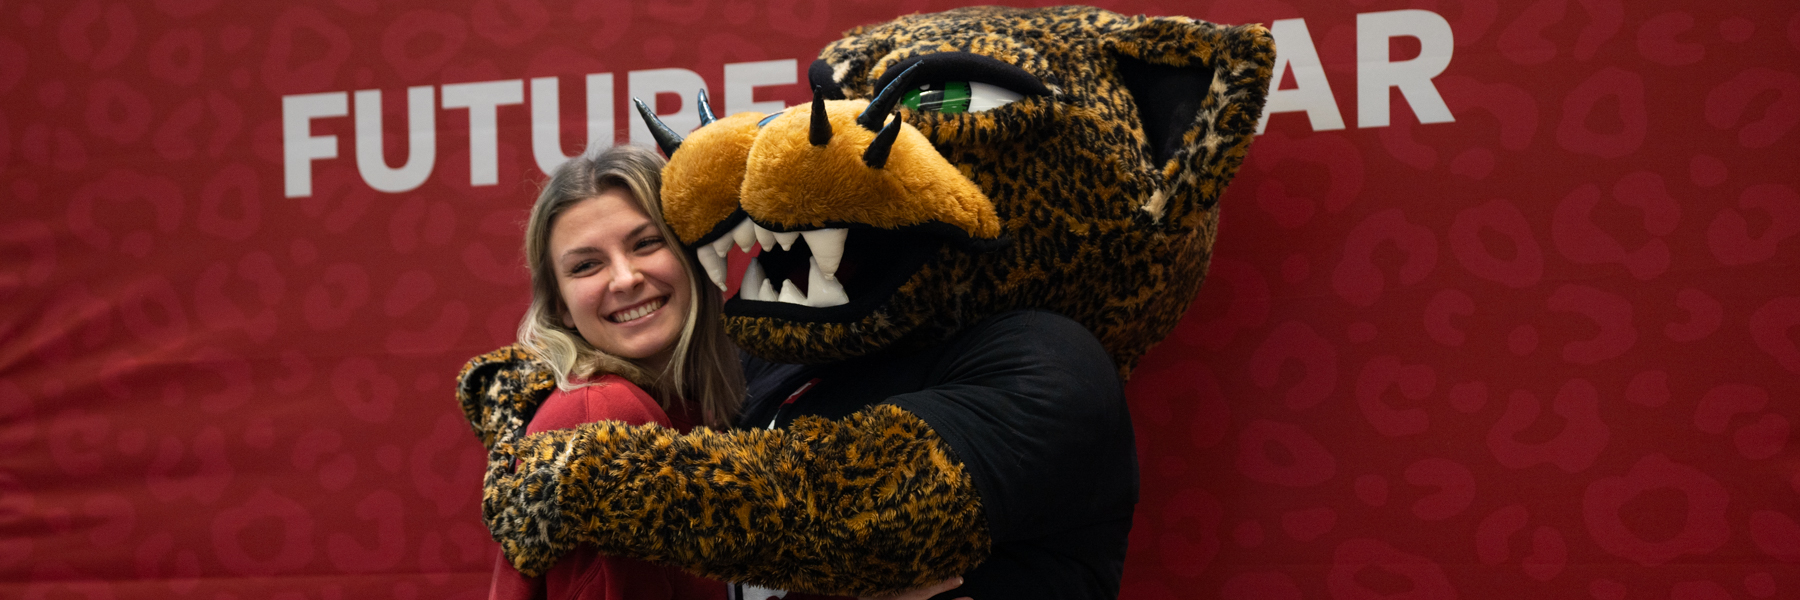 A newly admitted student poses in a hug with the IU Indianapolis jaguar mascot Jawz in front of a crimson banner that says future Jaguar and has red on red jaguar spots